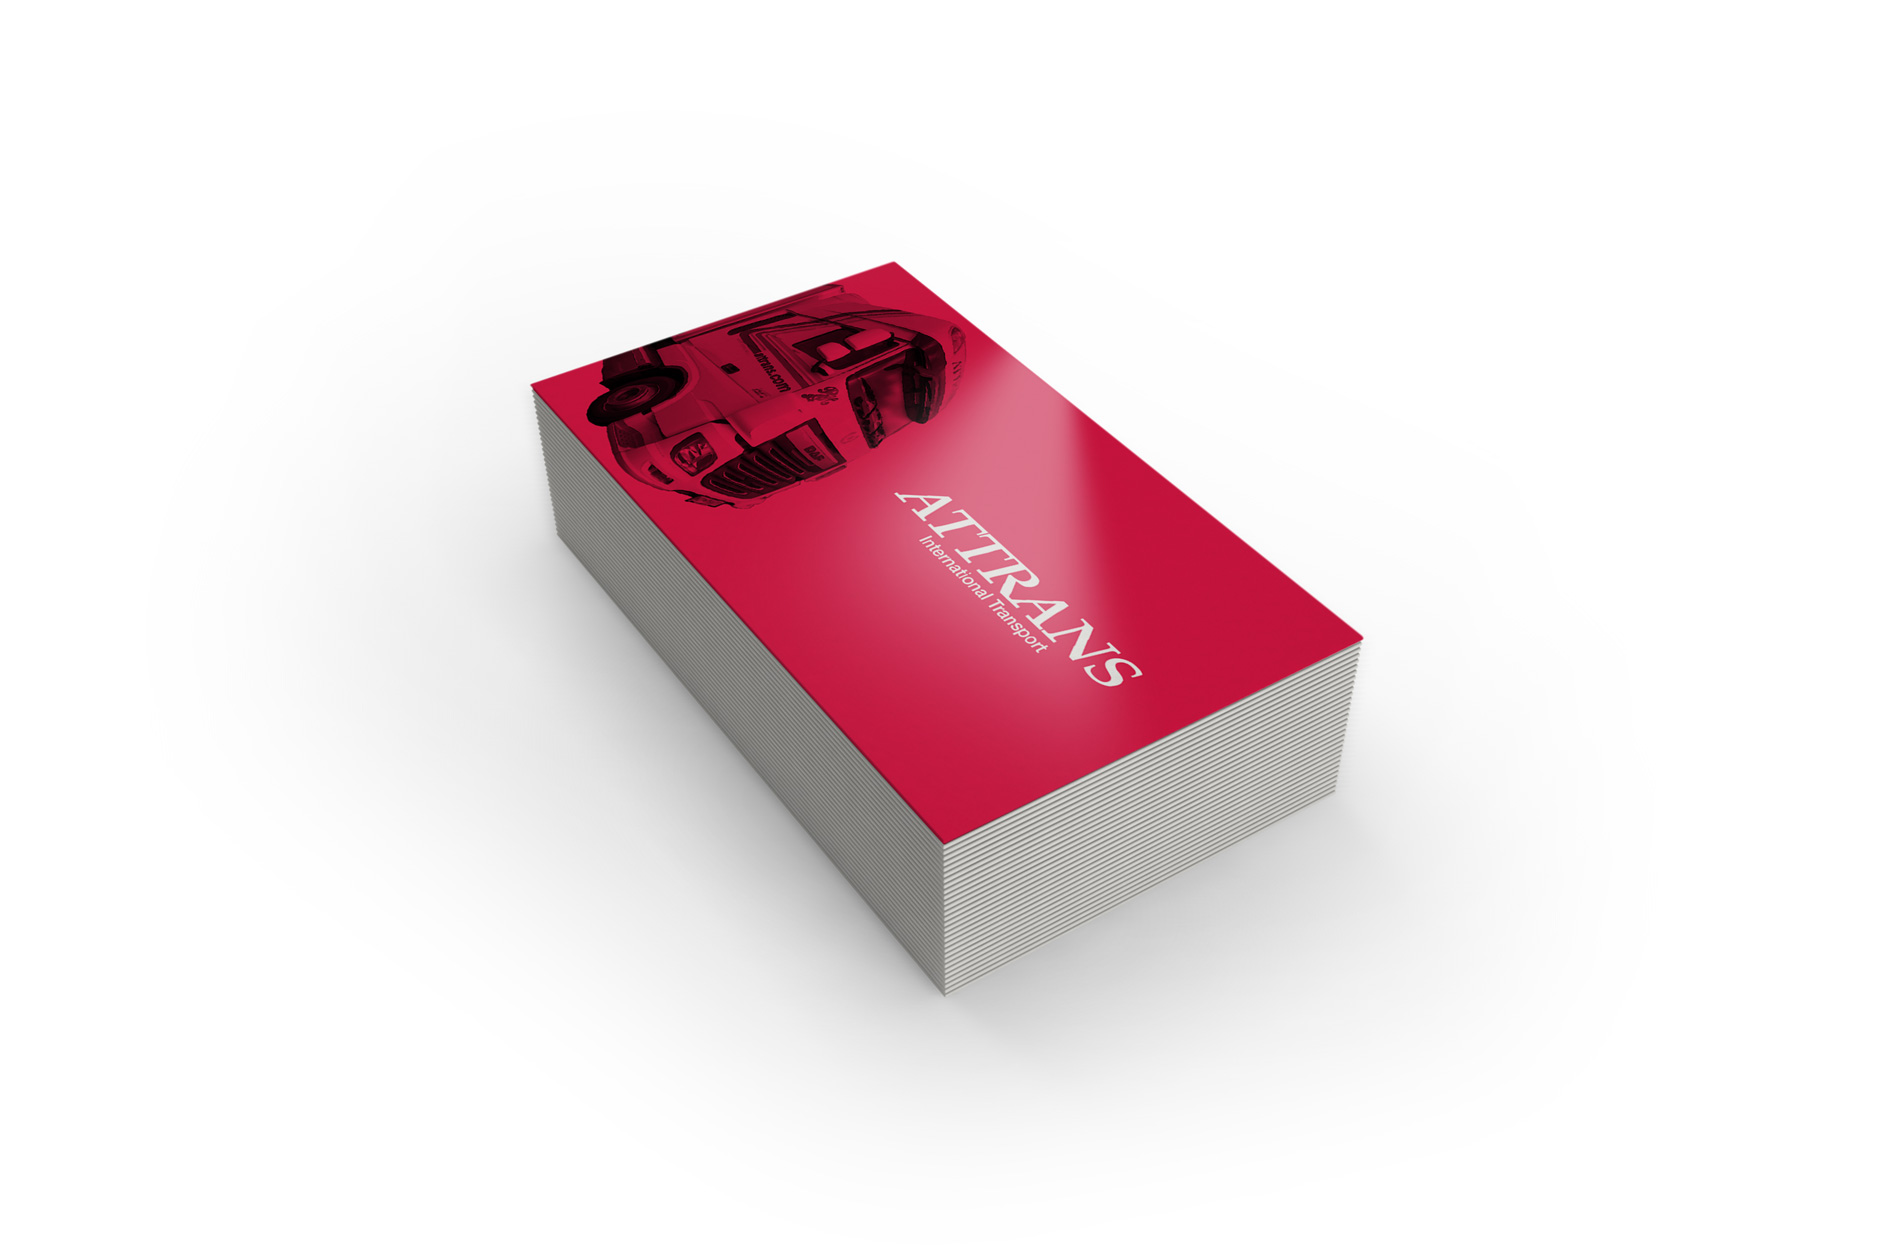 Attrans business cards